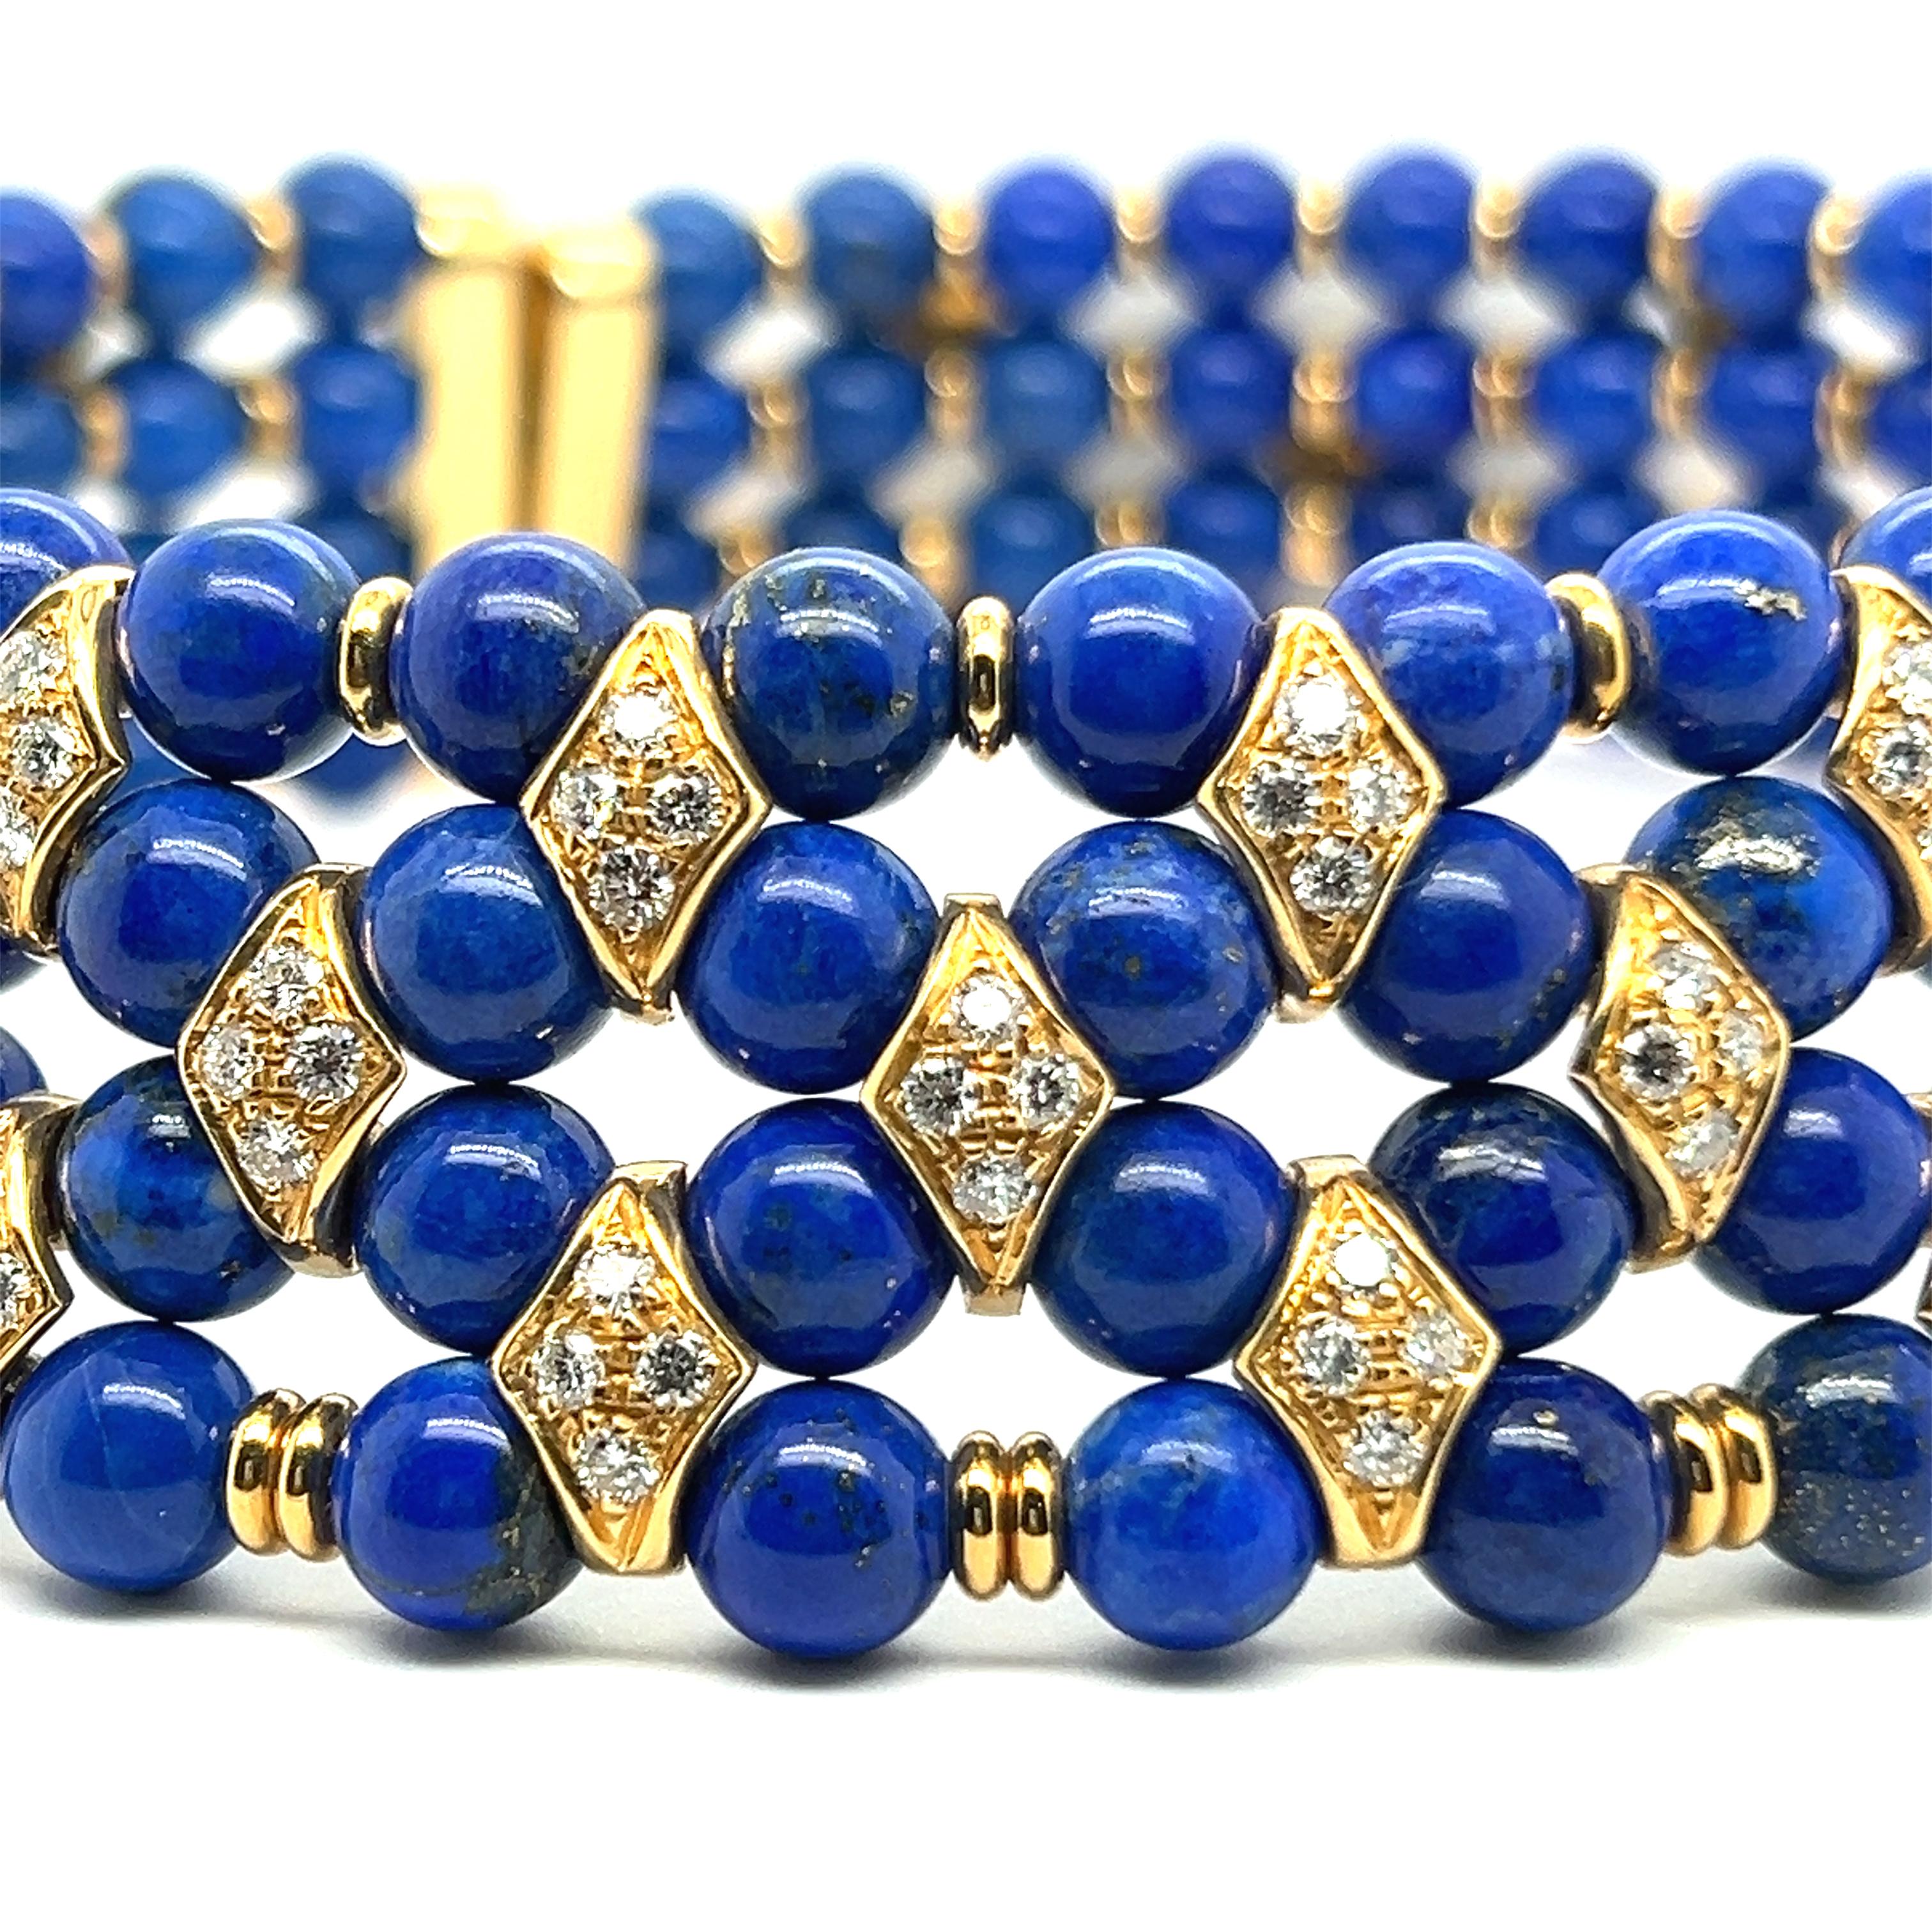 Elevate your neckline with this stunning choker necklace, adorned with 144 round lapis lazuli beads of around 8.2 mm in diameters and 104 brilliant-cut diamonds of G-H color and vs clarity, totaling 5.20 carats.  Set in 18 Karat yellow gold, it